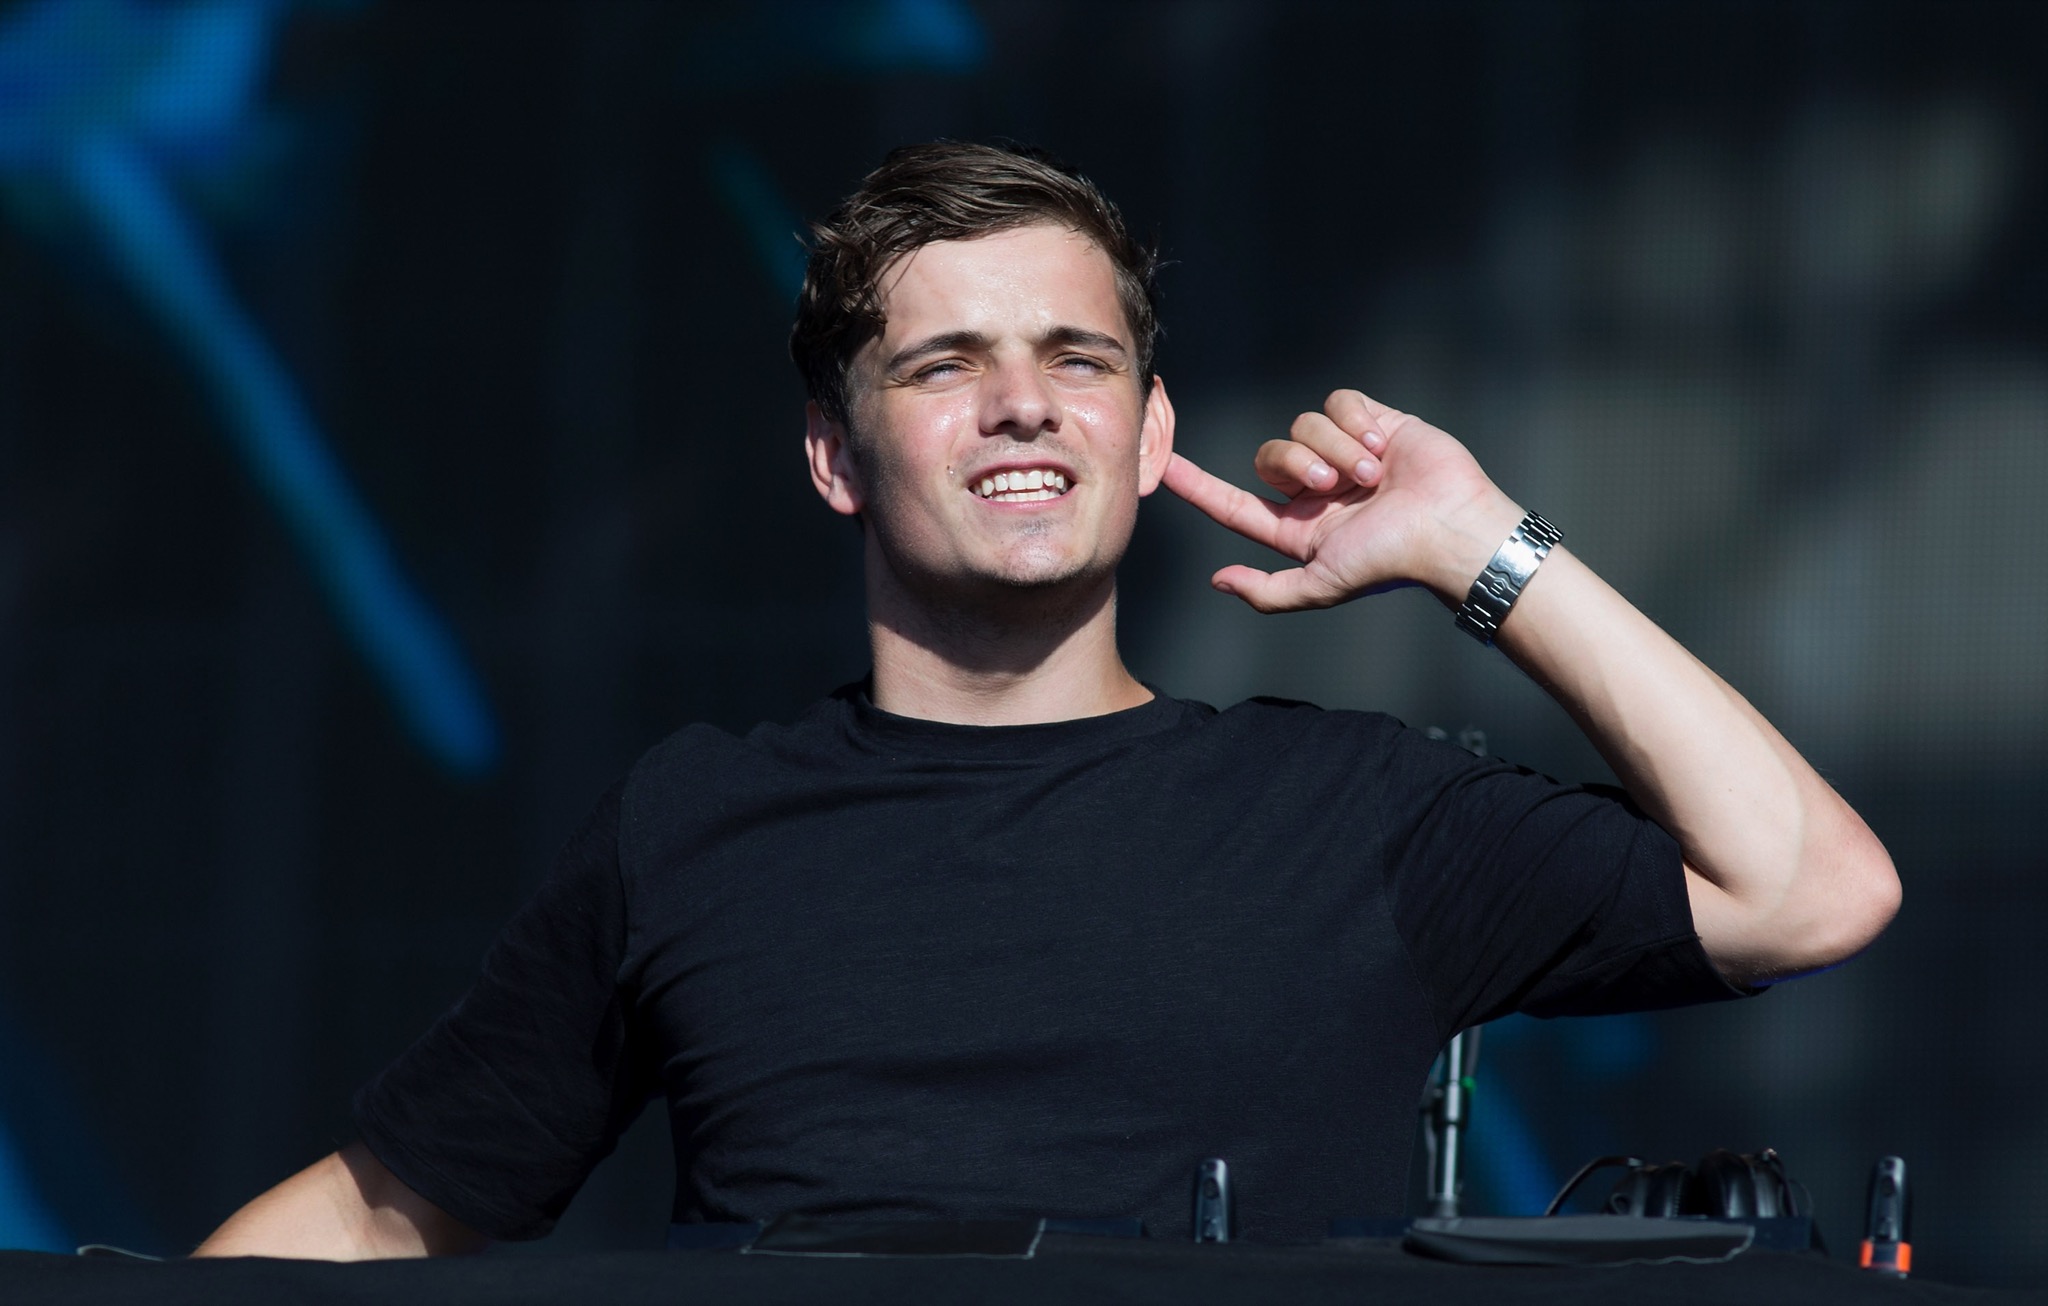 How much does Martin garrix charge?